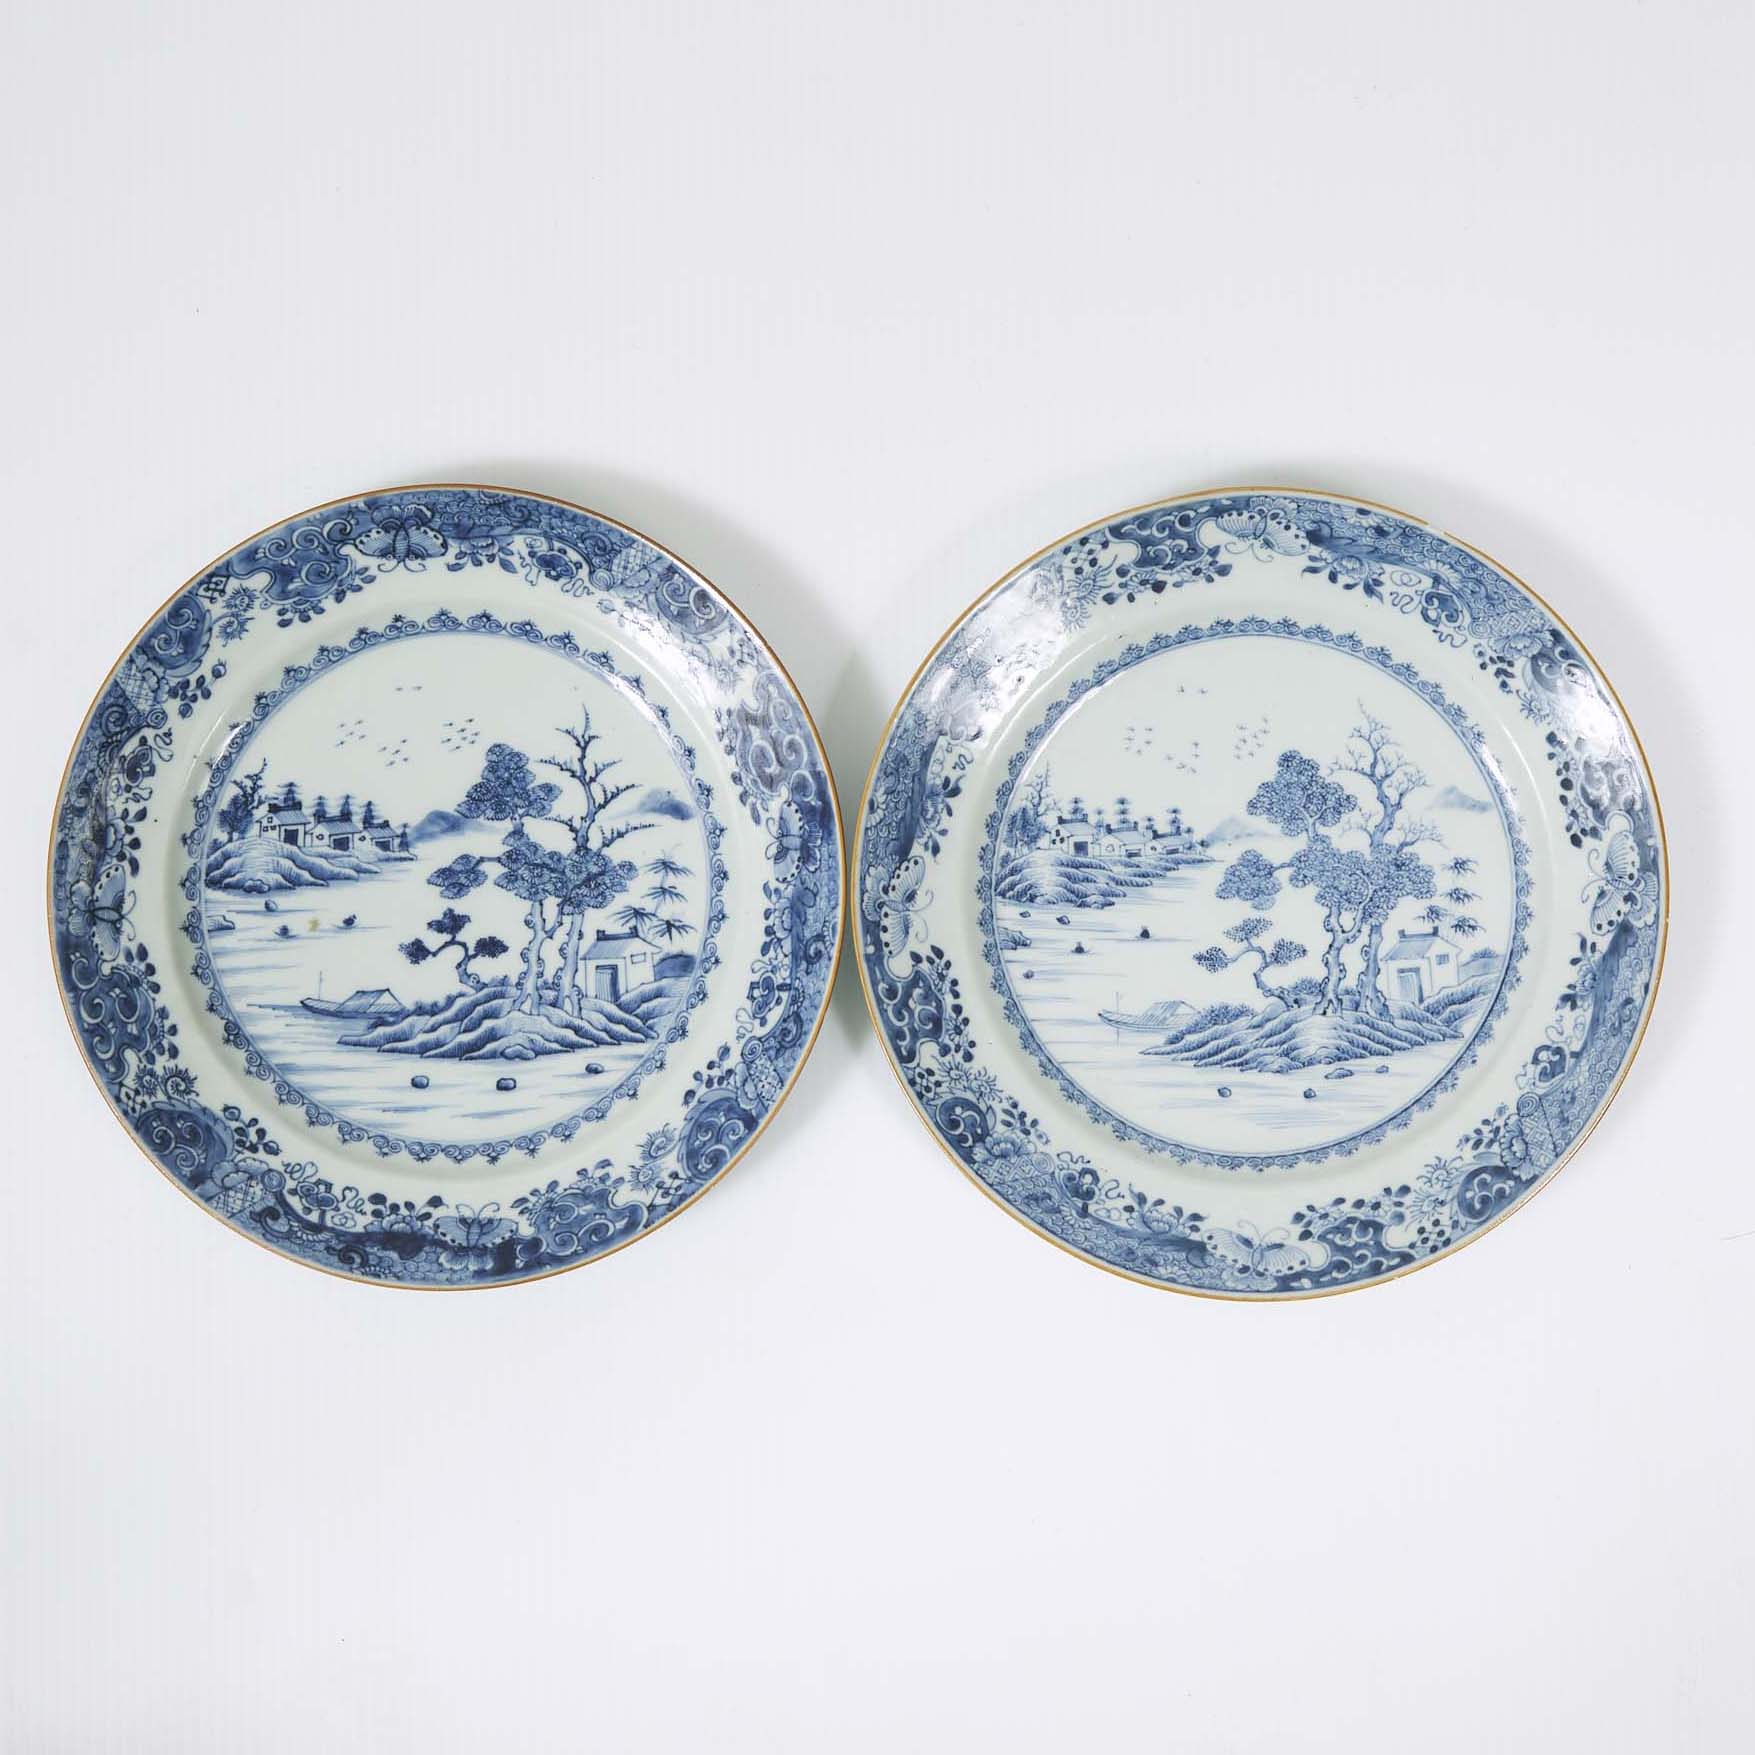 A Pair of Blue and White 'Landscape' Plates, 18th Century